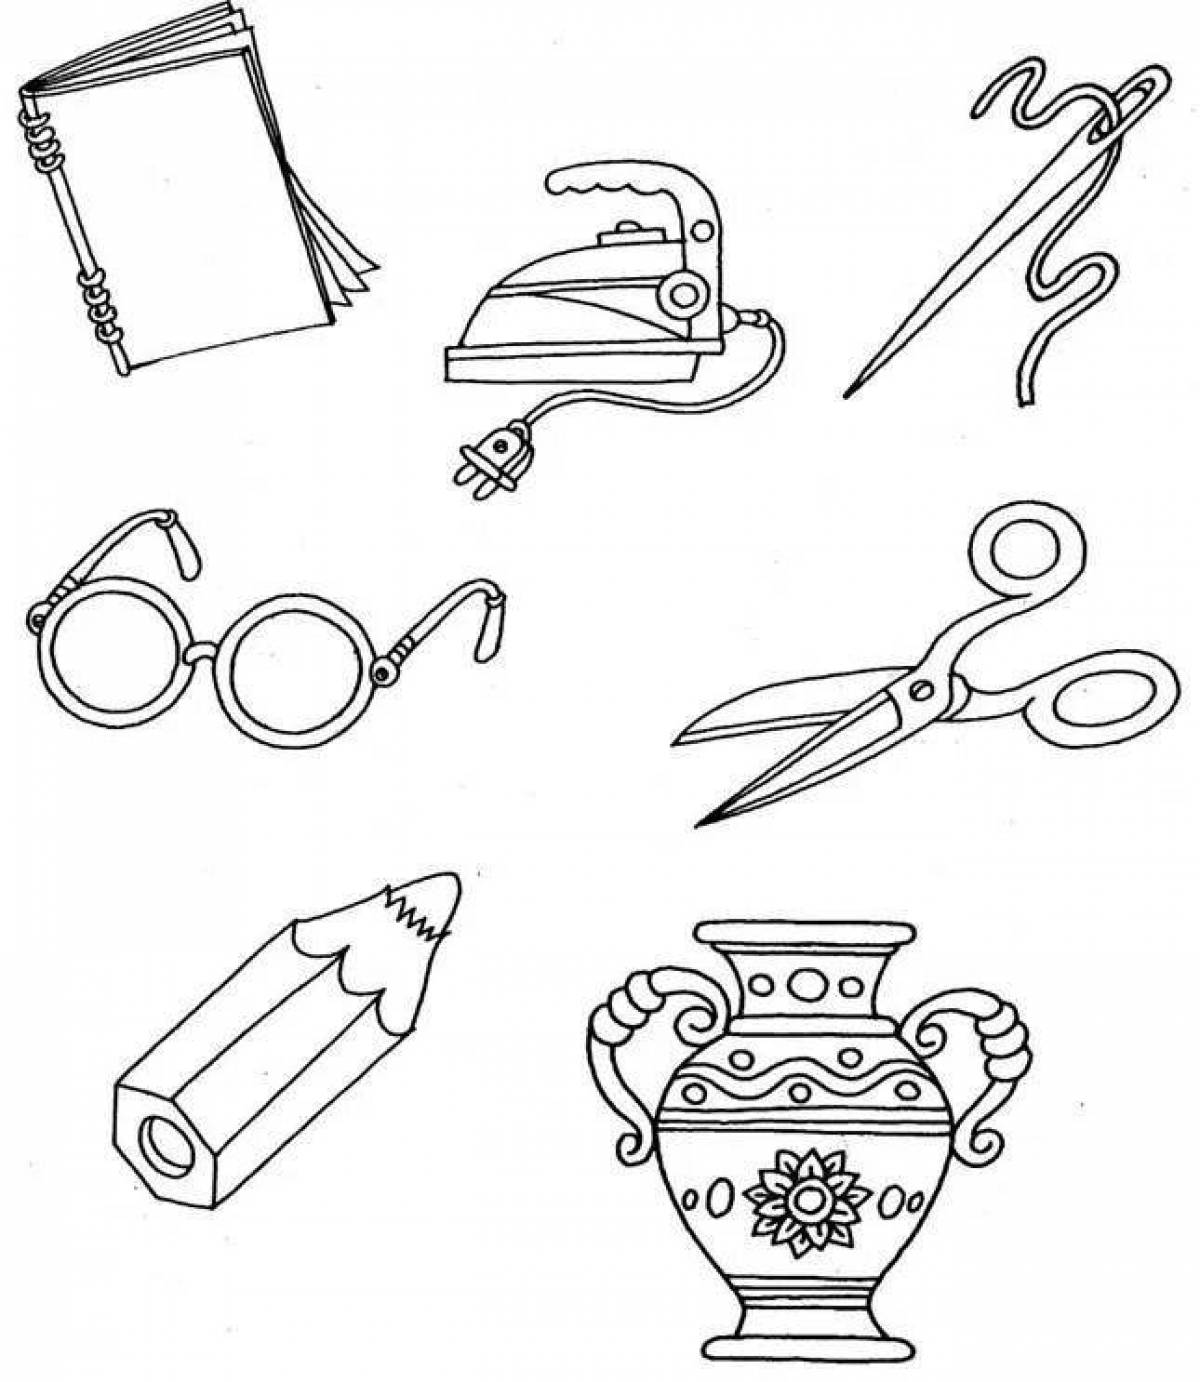 Bright household items coloring page